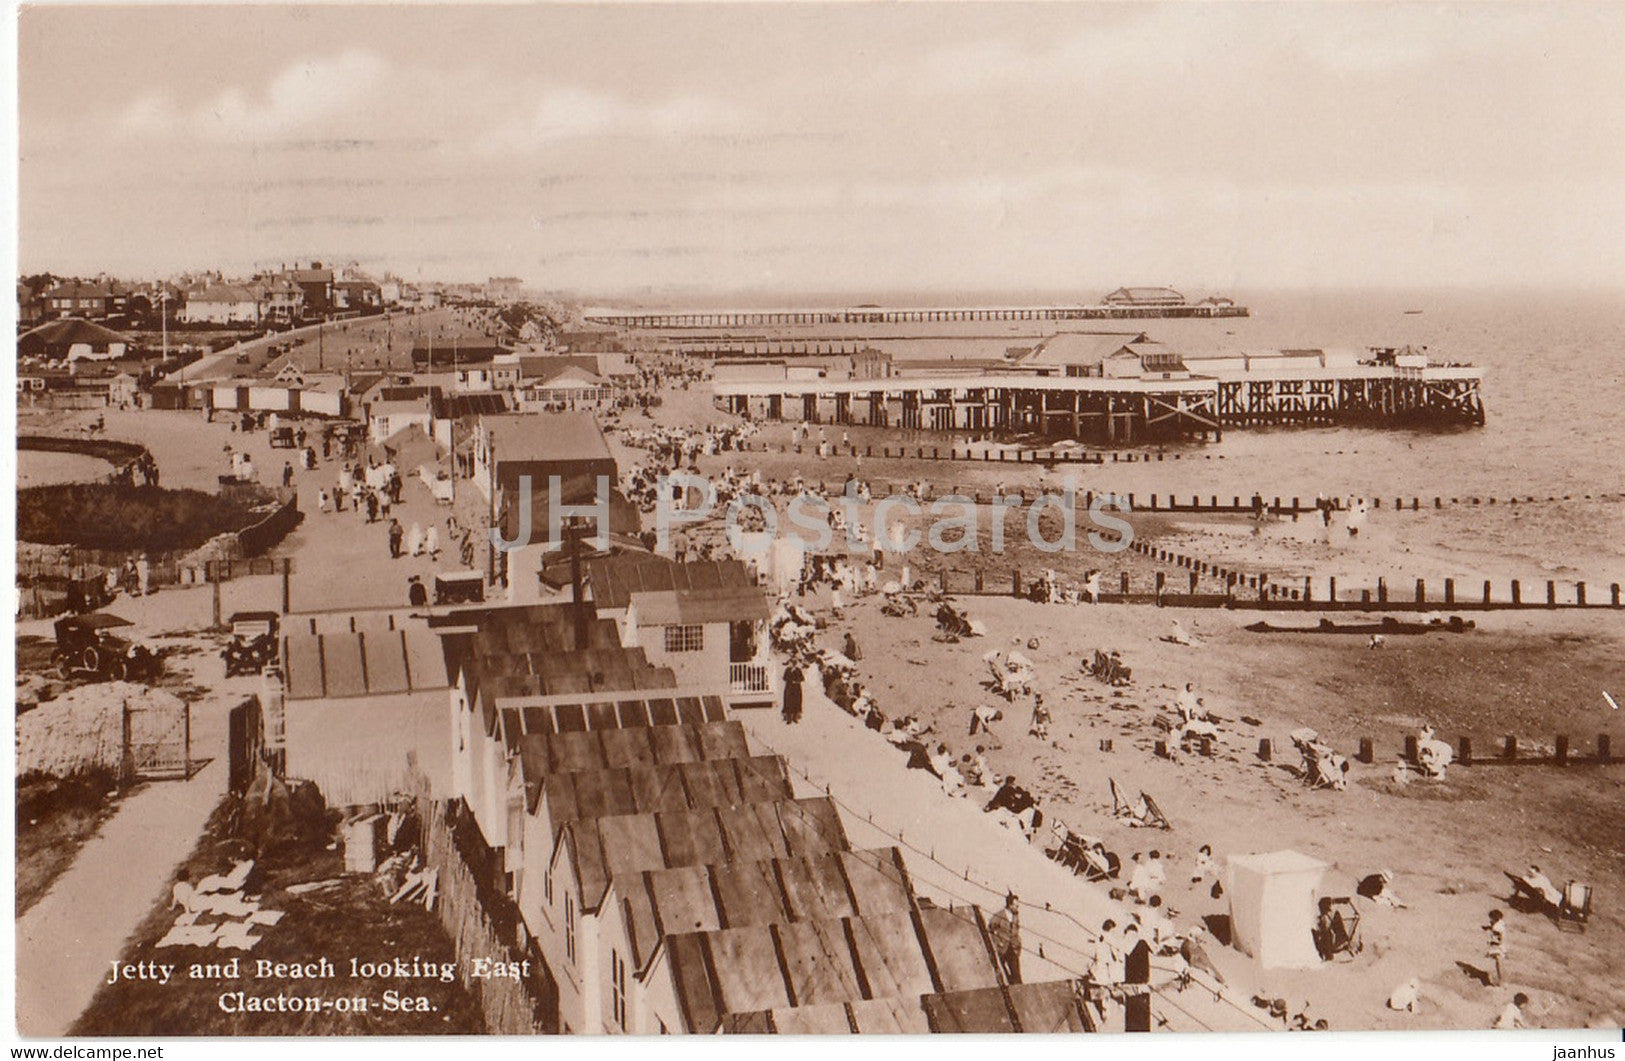 Clacton on Sea - Jetty and Beach looking East - old postcard - England - 1928 - United Kingdom - used - JH Postcards